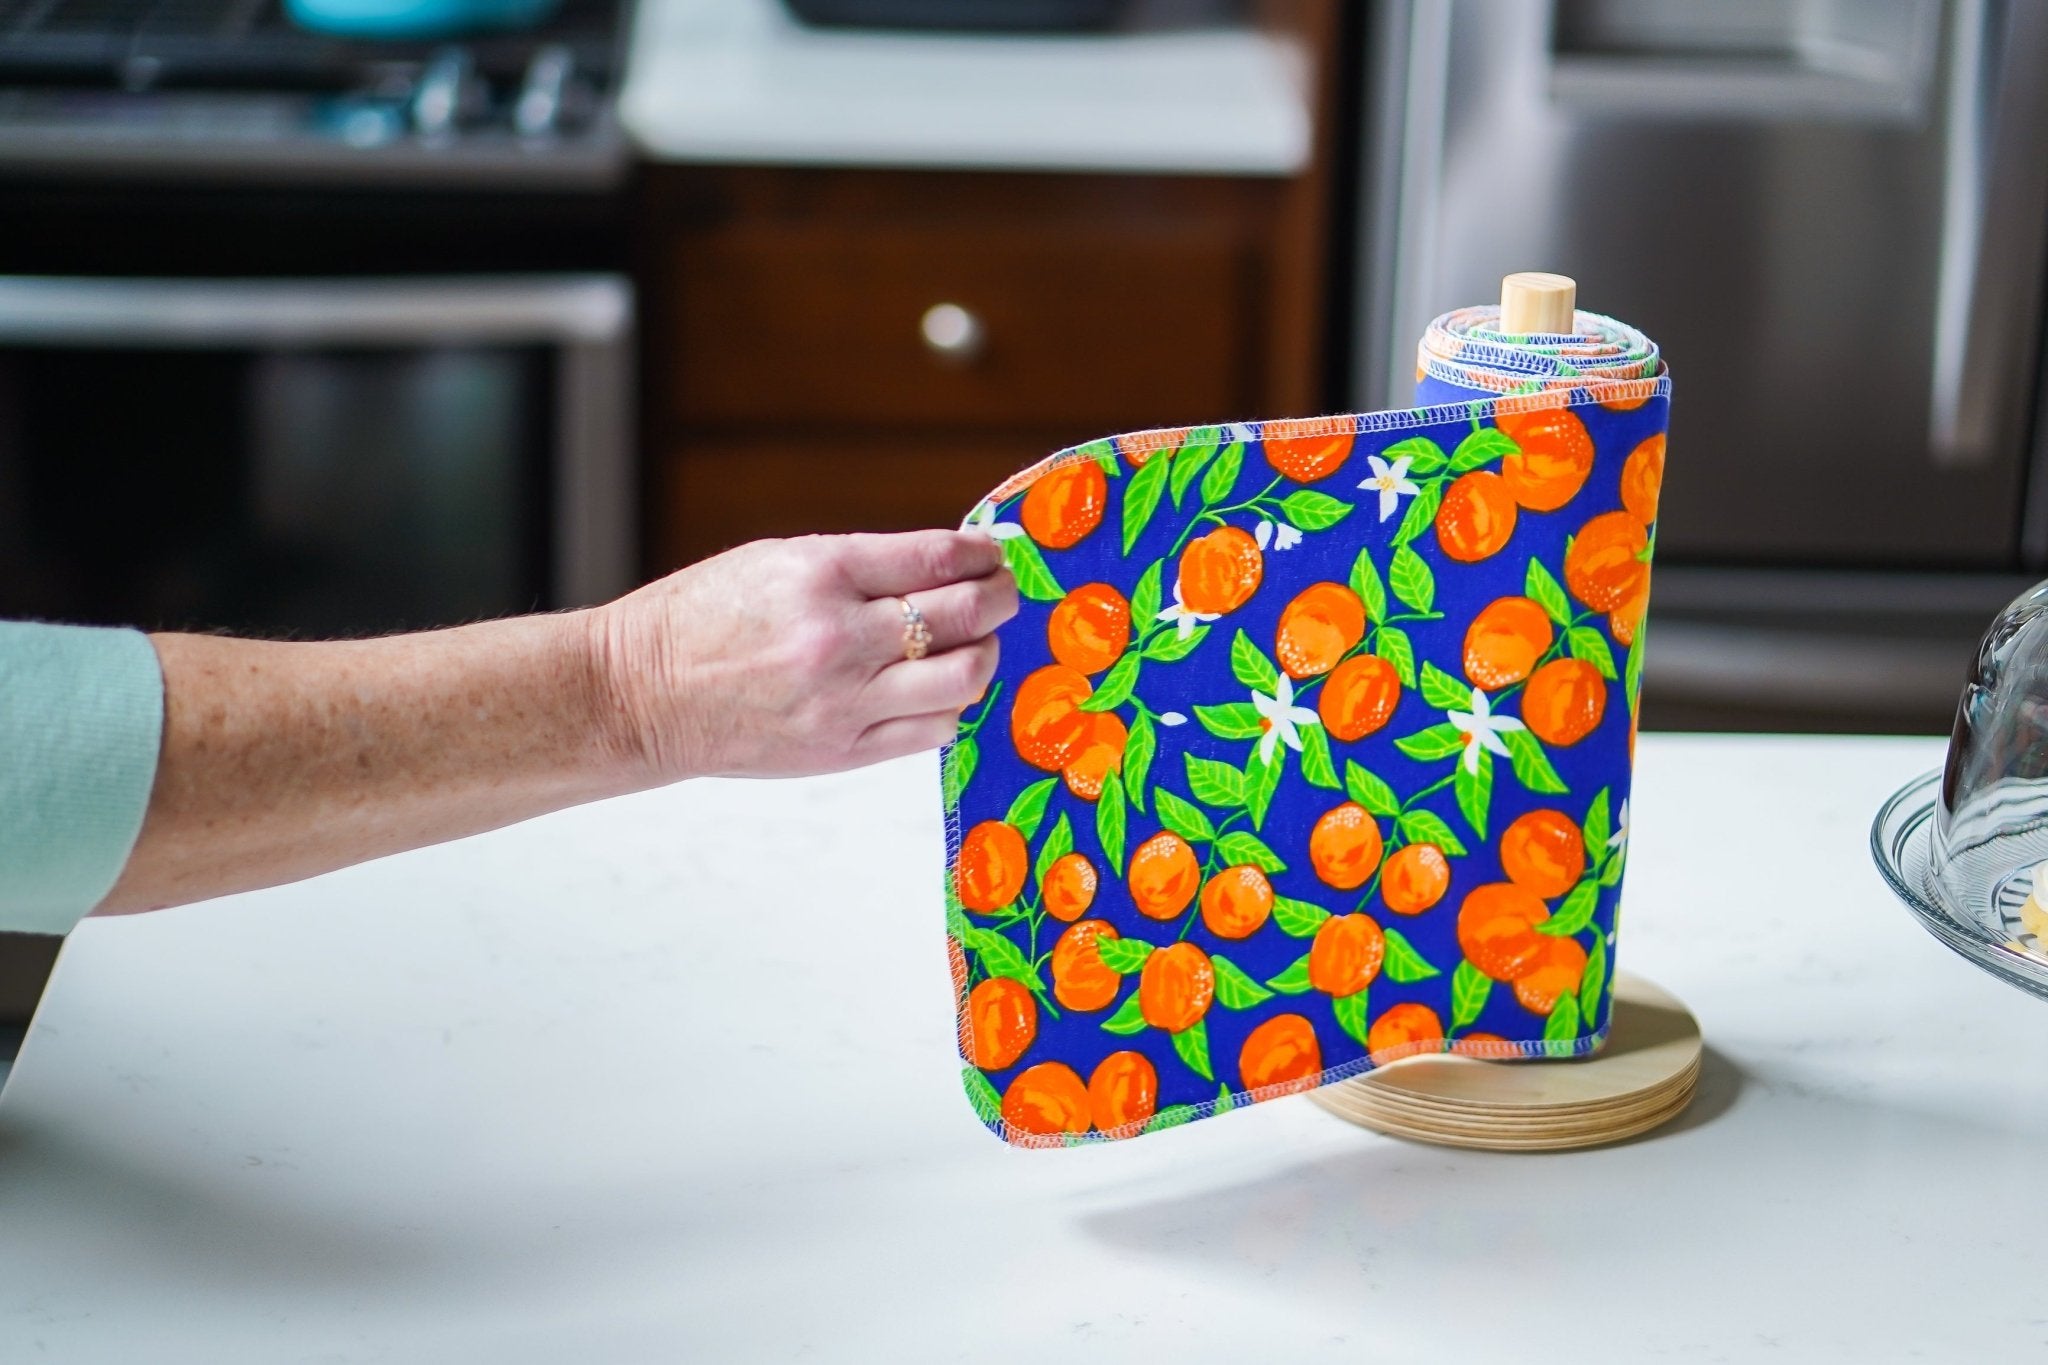 How to Make Reusable Paper Towels and My Favorite Sustainable